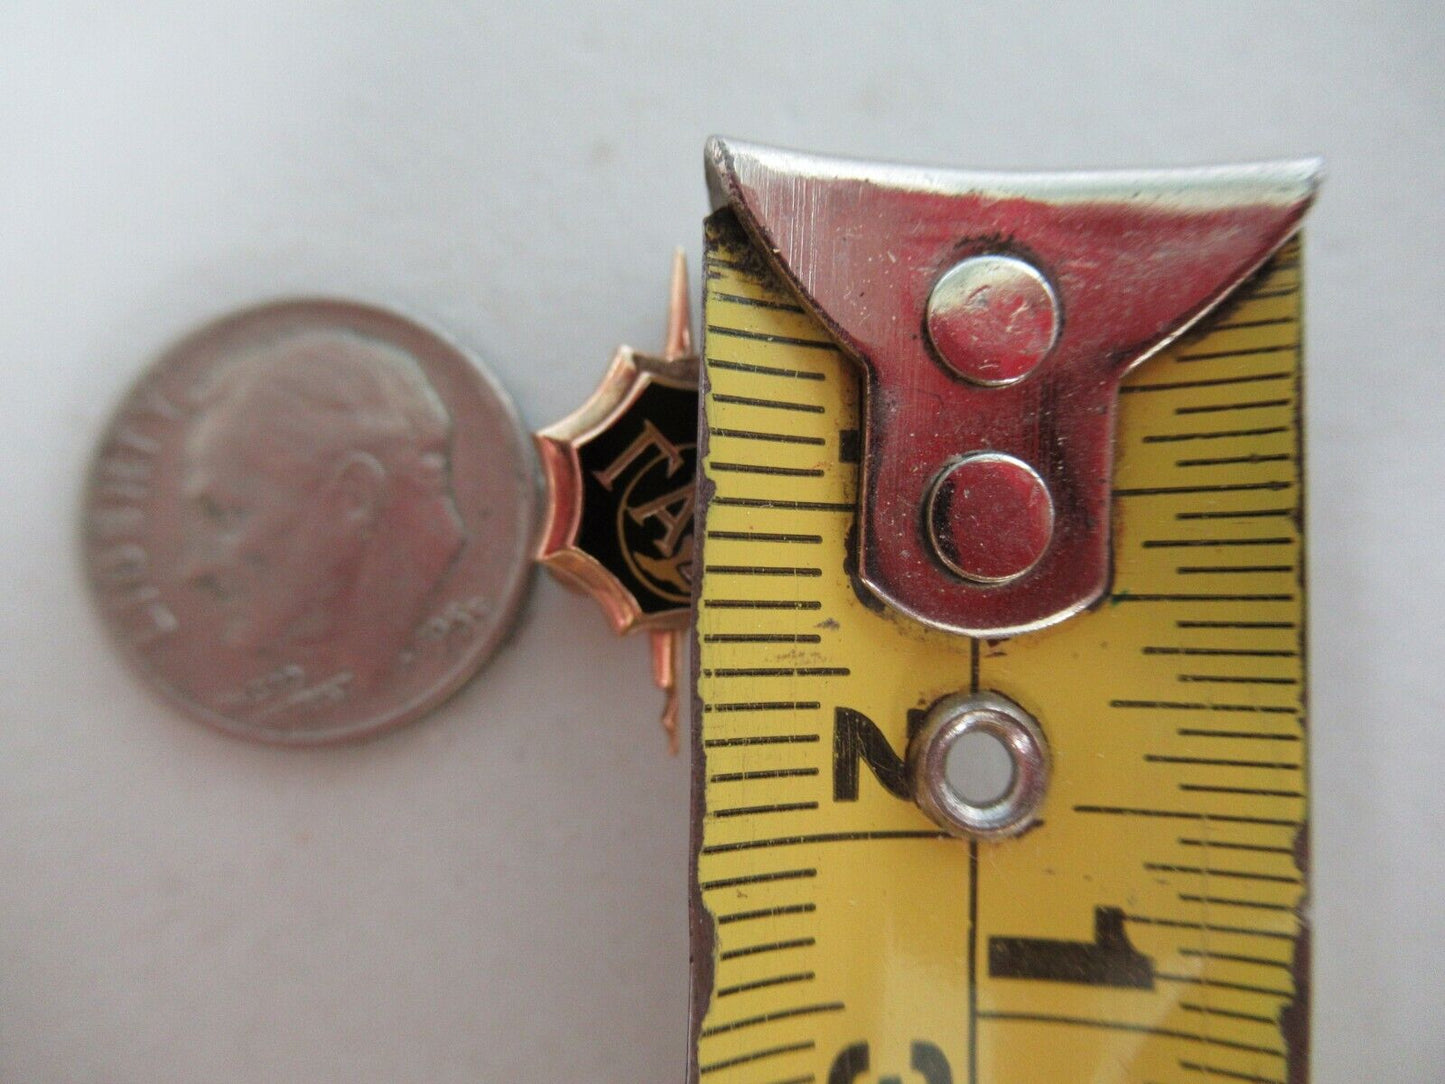 USA FRATERNITY PIN GAMMA ALPHA CHI. MADE IN GOLD. 1959. NAMED. 781